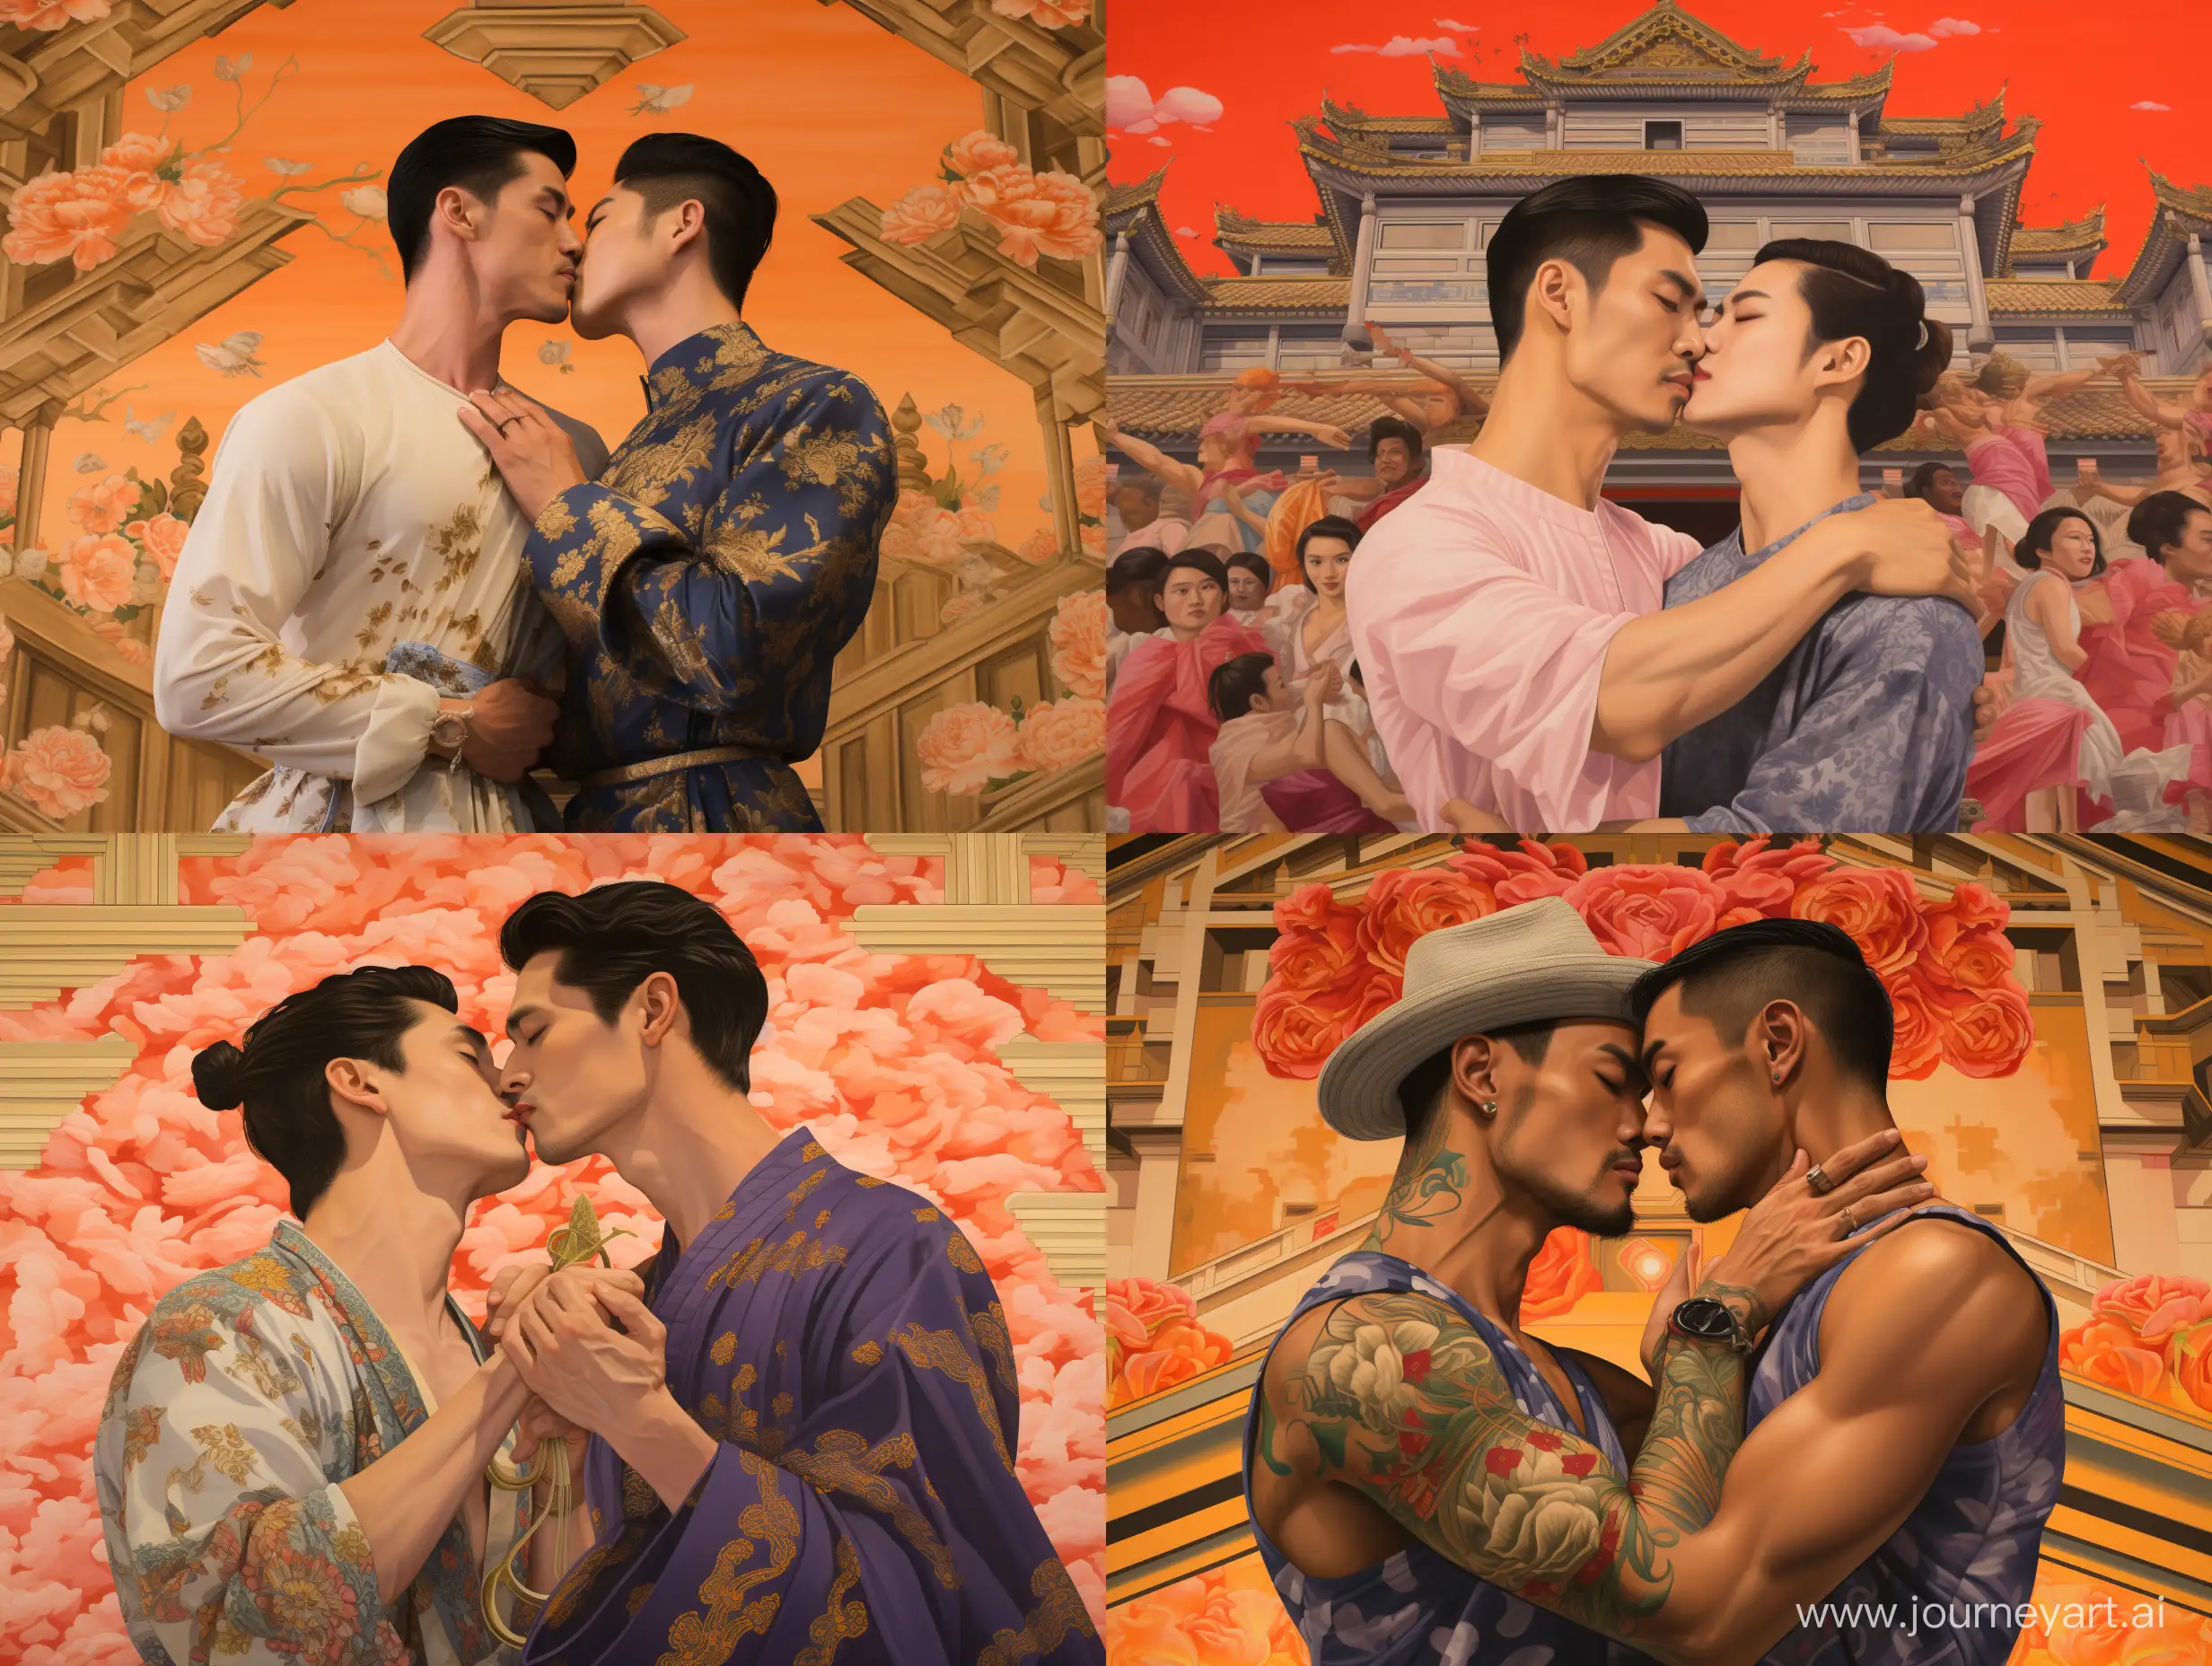 two Thailand gay actors kissing in front of  Phra Phrom, full-length portrait, surrounded by their fans,
Ukiyo-e style